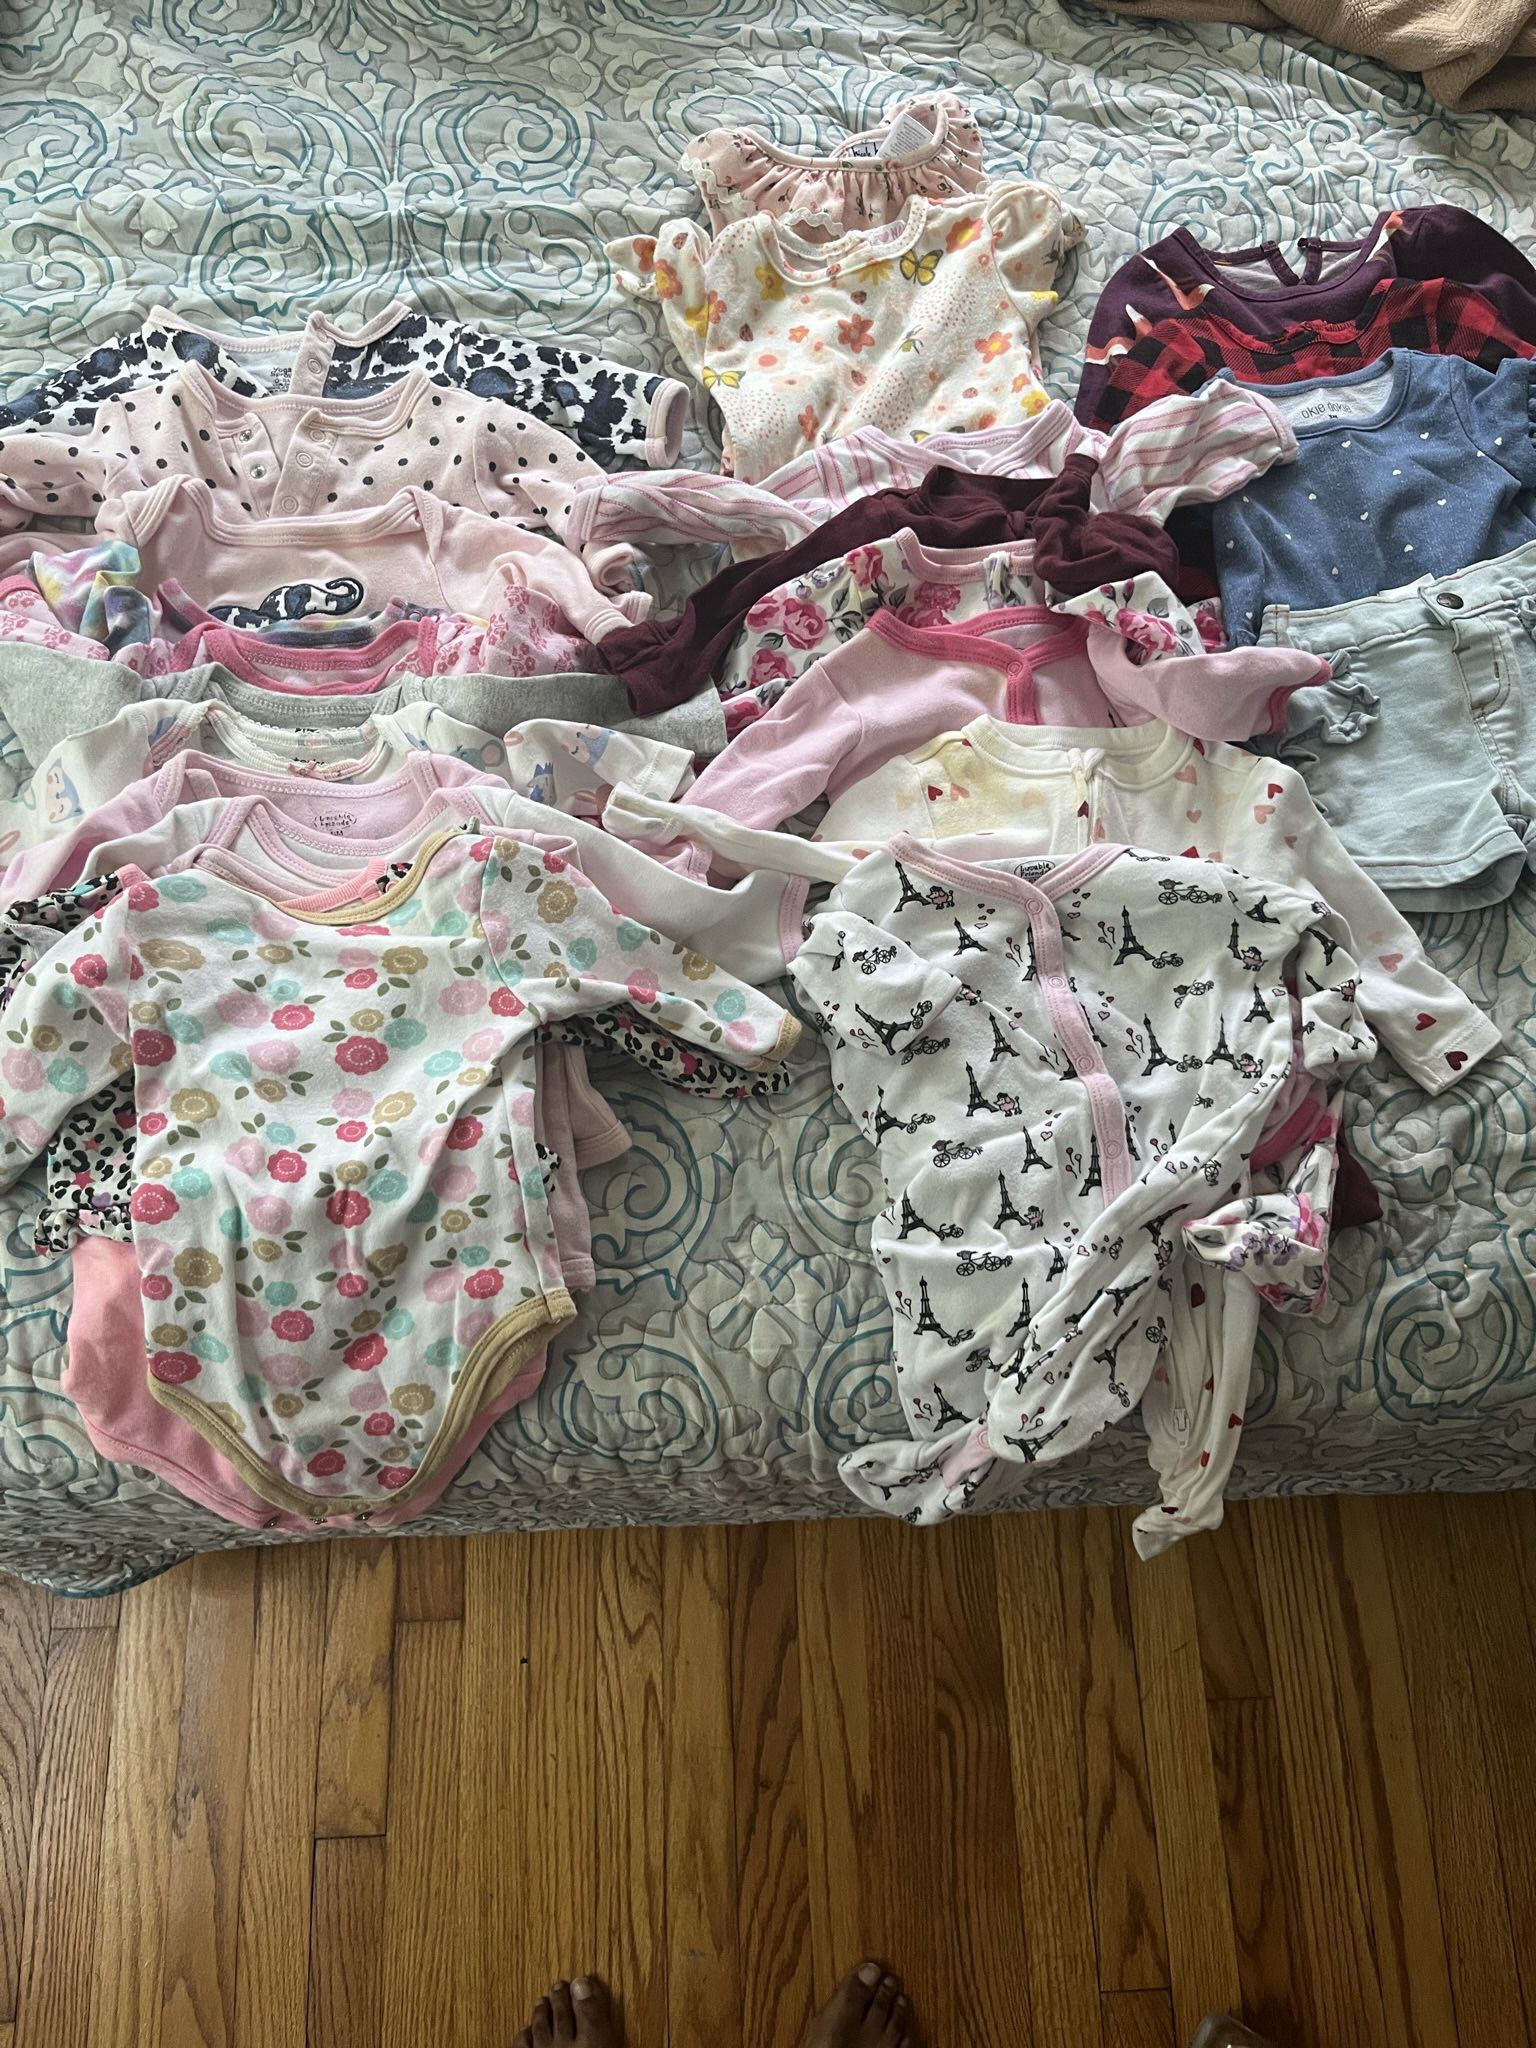 Baby Clothes And Gear